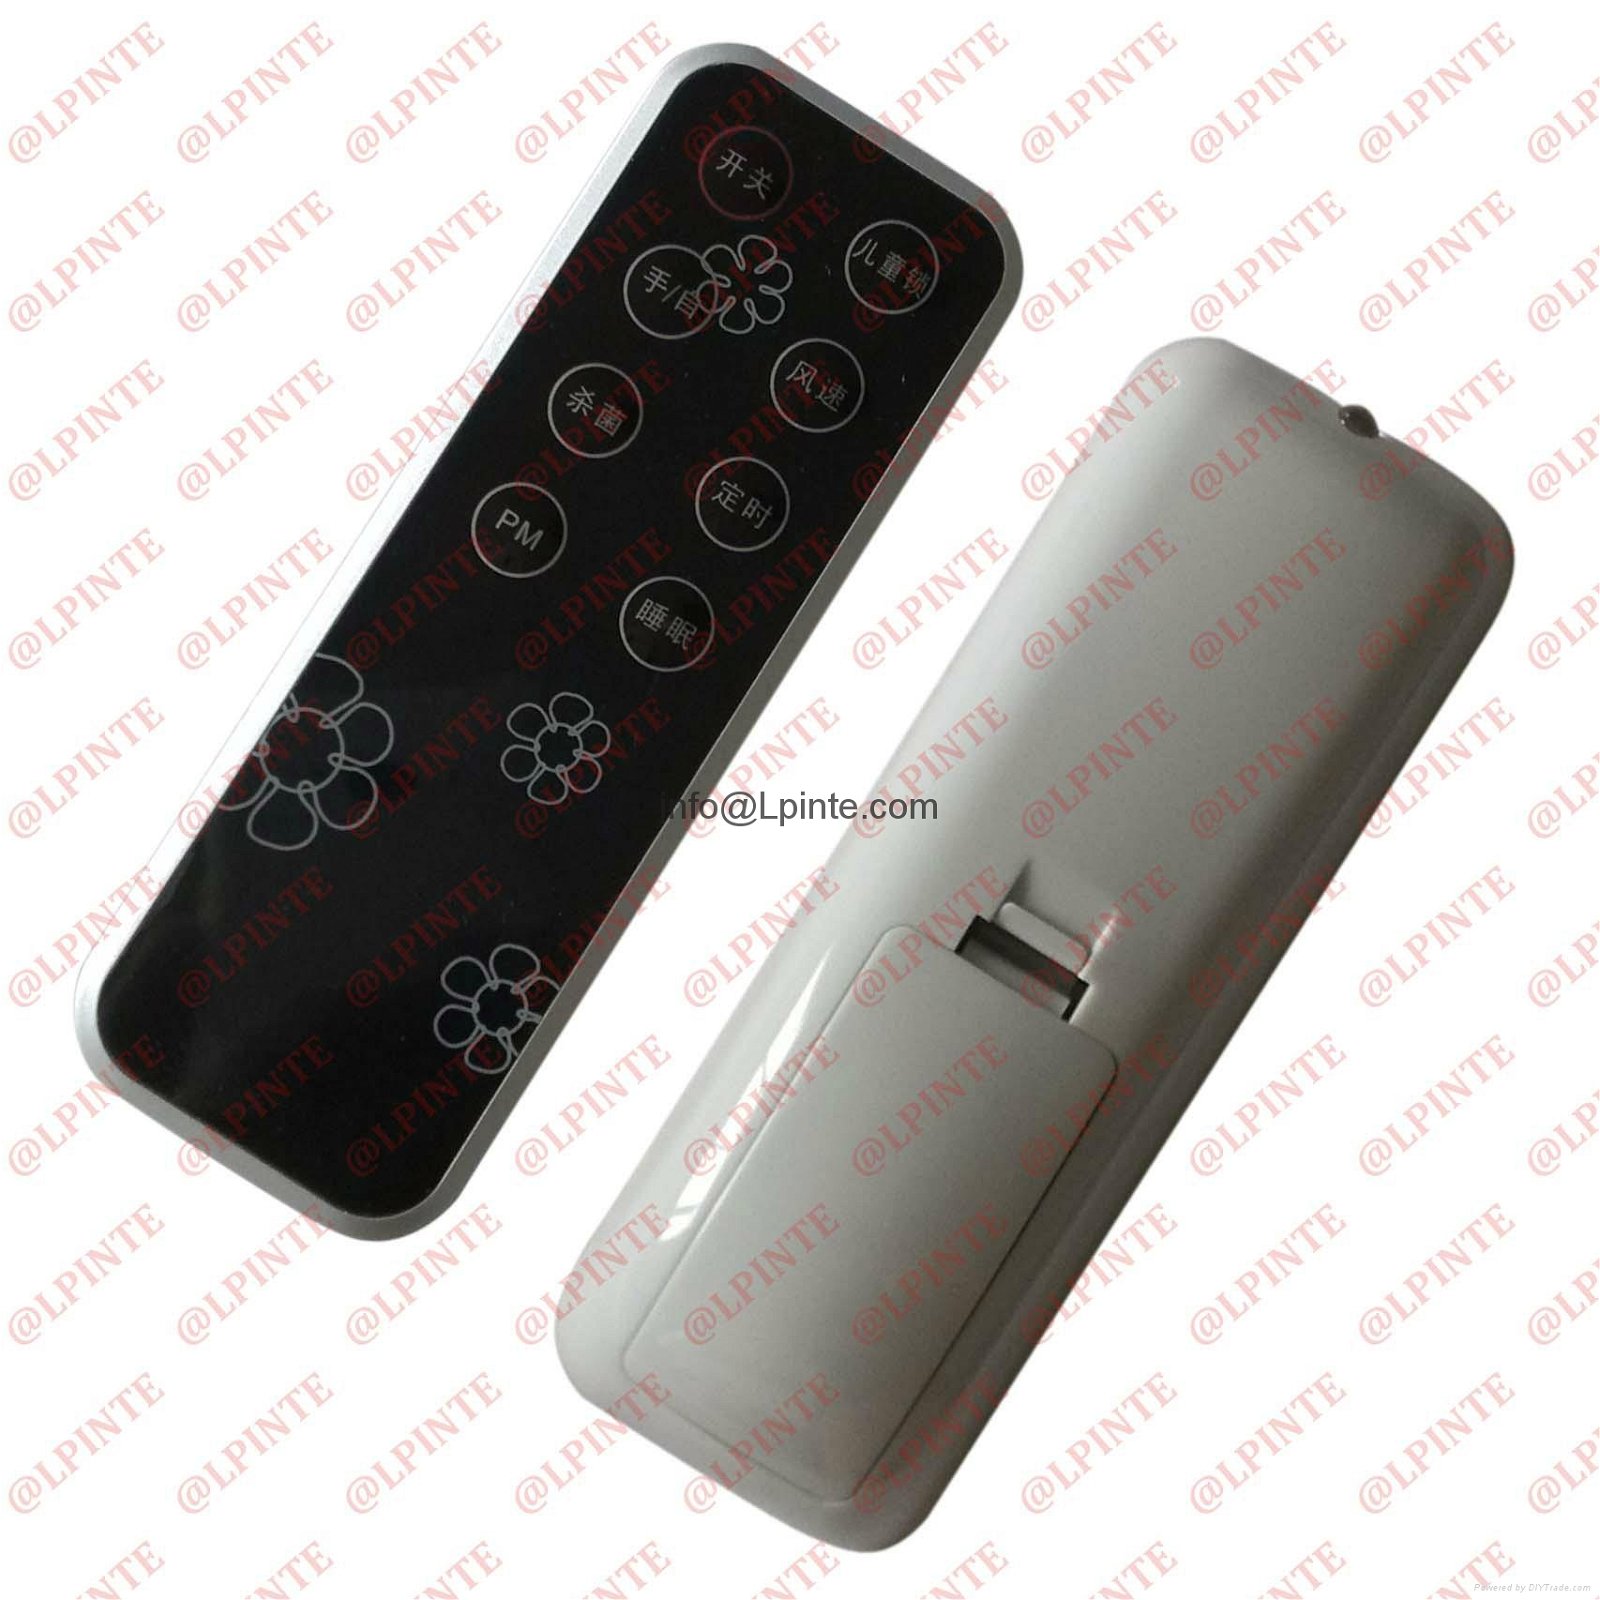 space heater remote